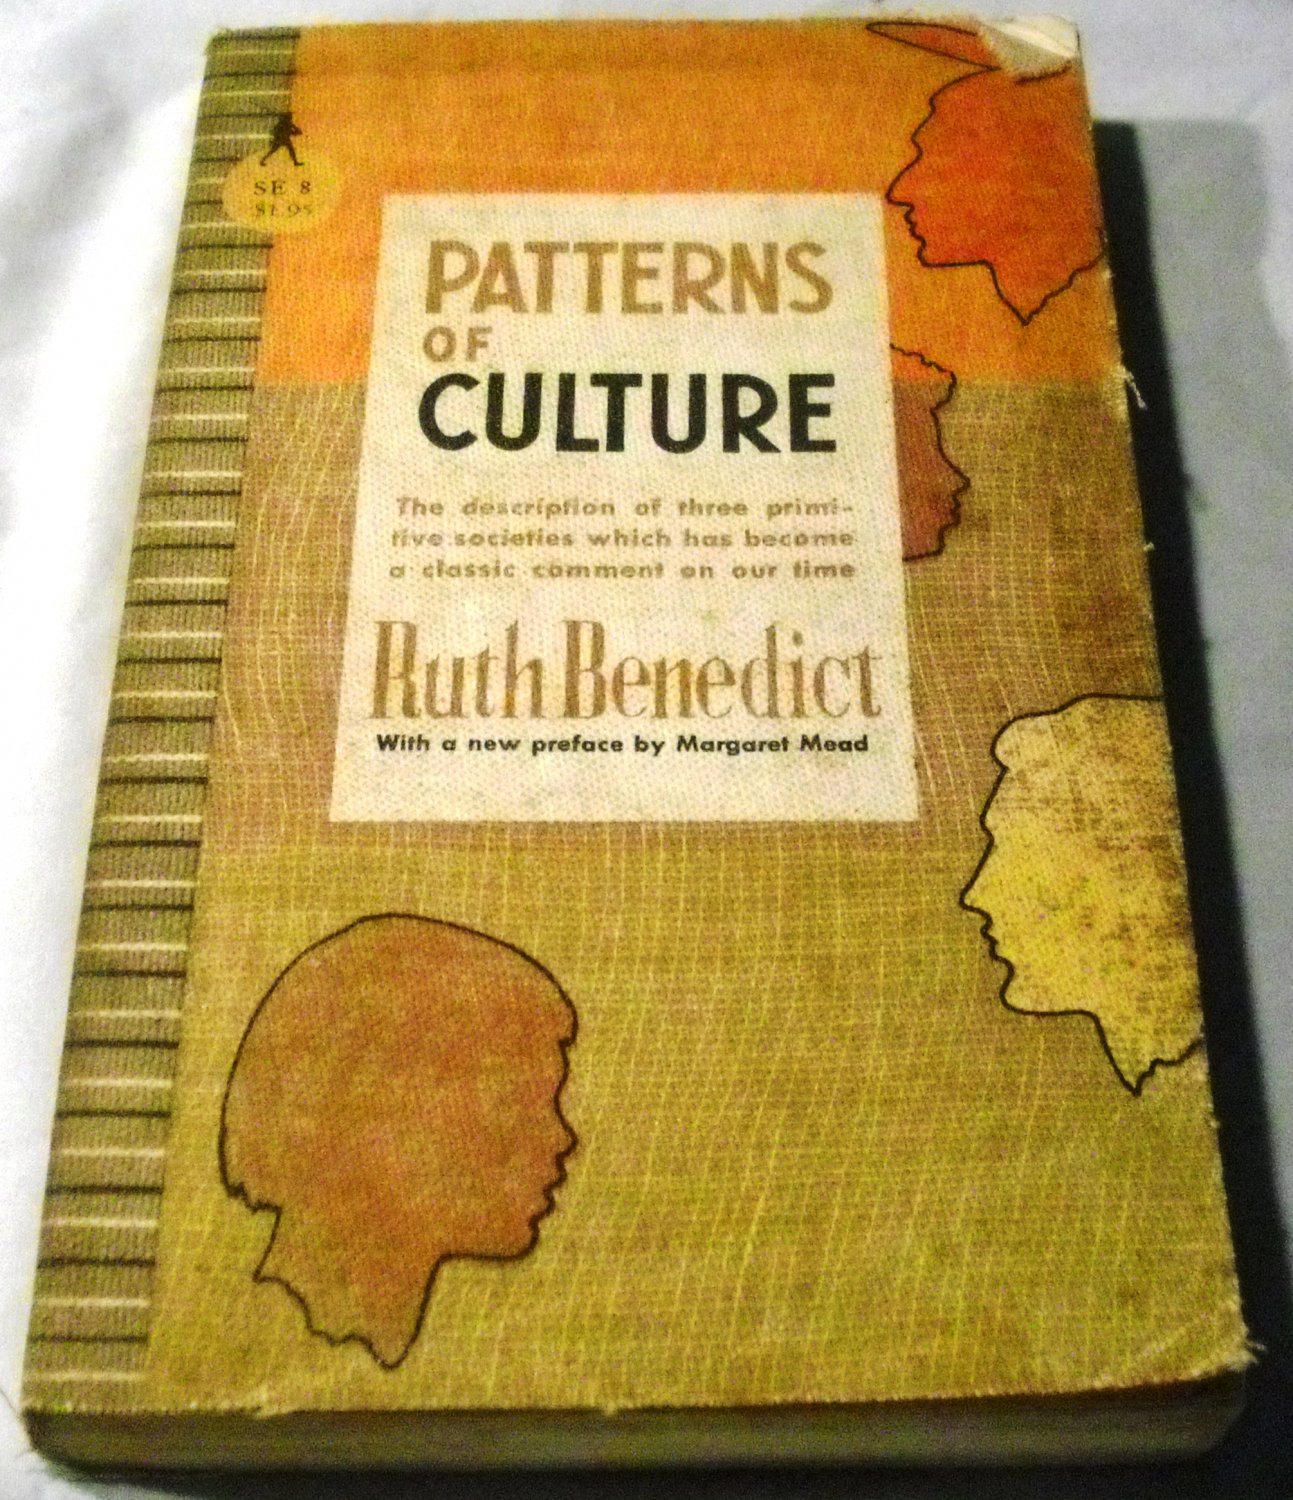 Patterns Of Culture [paperback] Ruth Benedict Author Margaret Mead